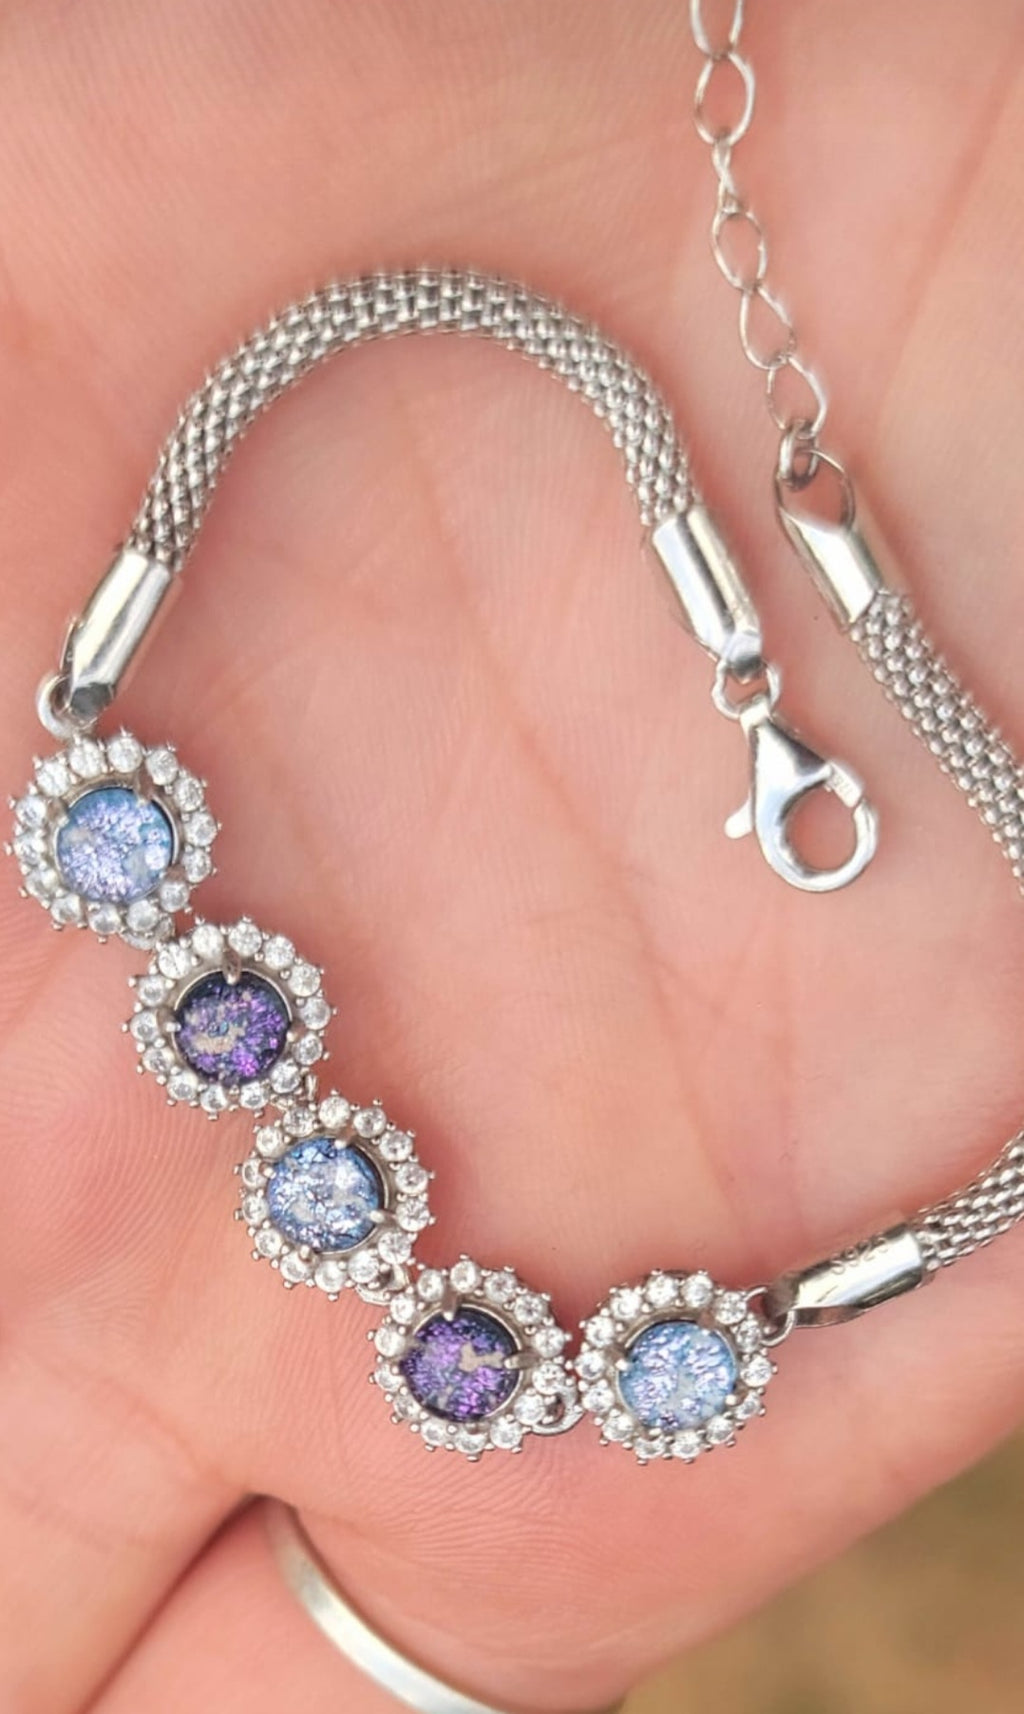 NEW CZ Halo Cremation Ash Bracelet 5x 5mm Stones Ashes InFused Glass Italian Silver Rope Chain Adjustable Clasp